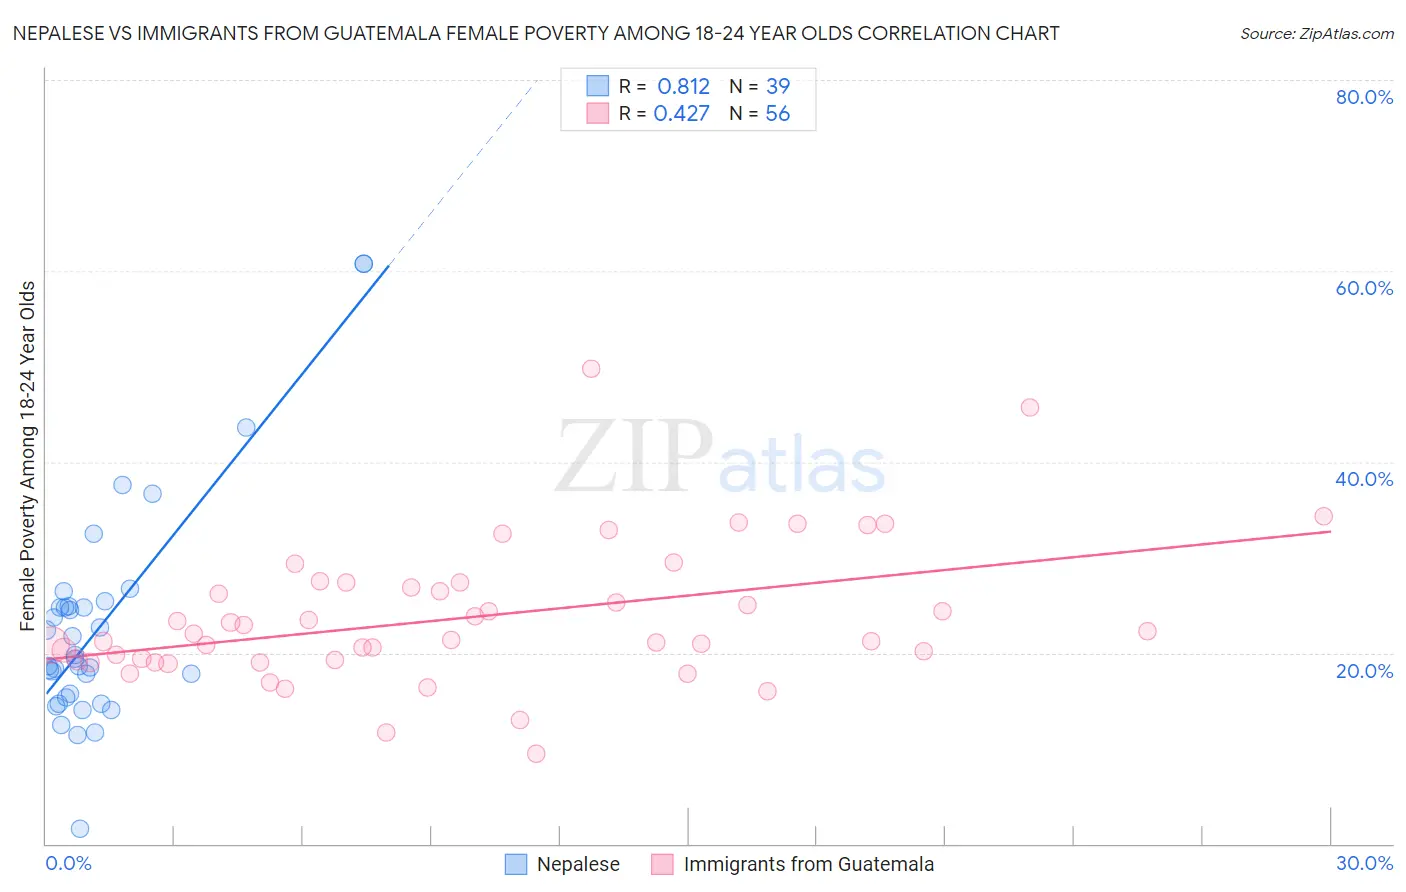 Nepalese vs Immigrants from Guatemala Female Poverty Among 18-24 Year Olds